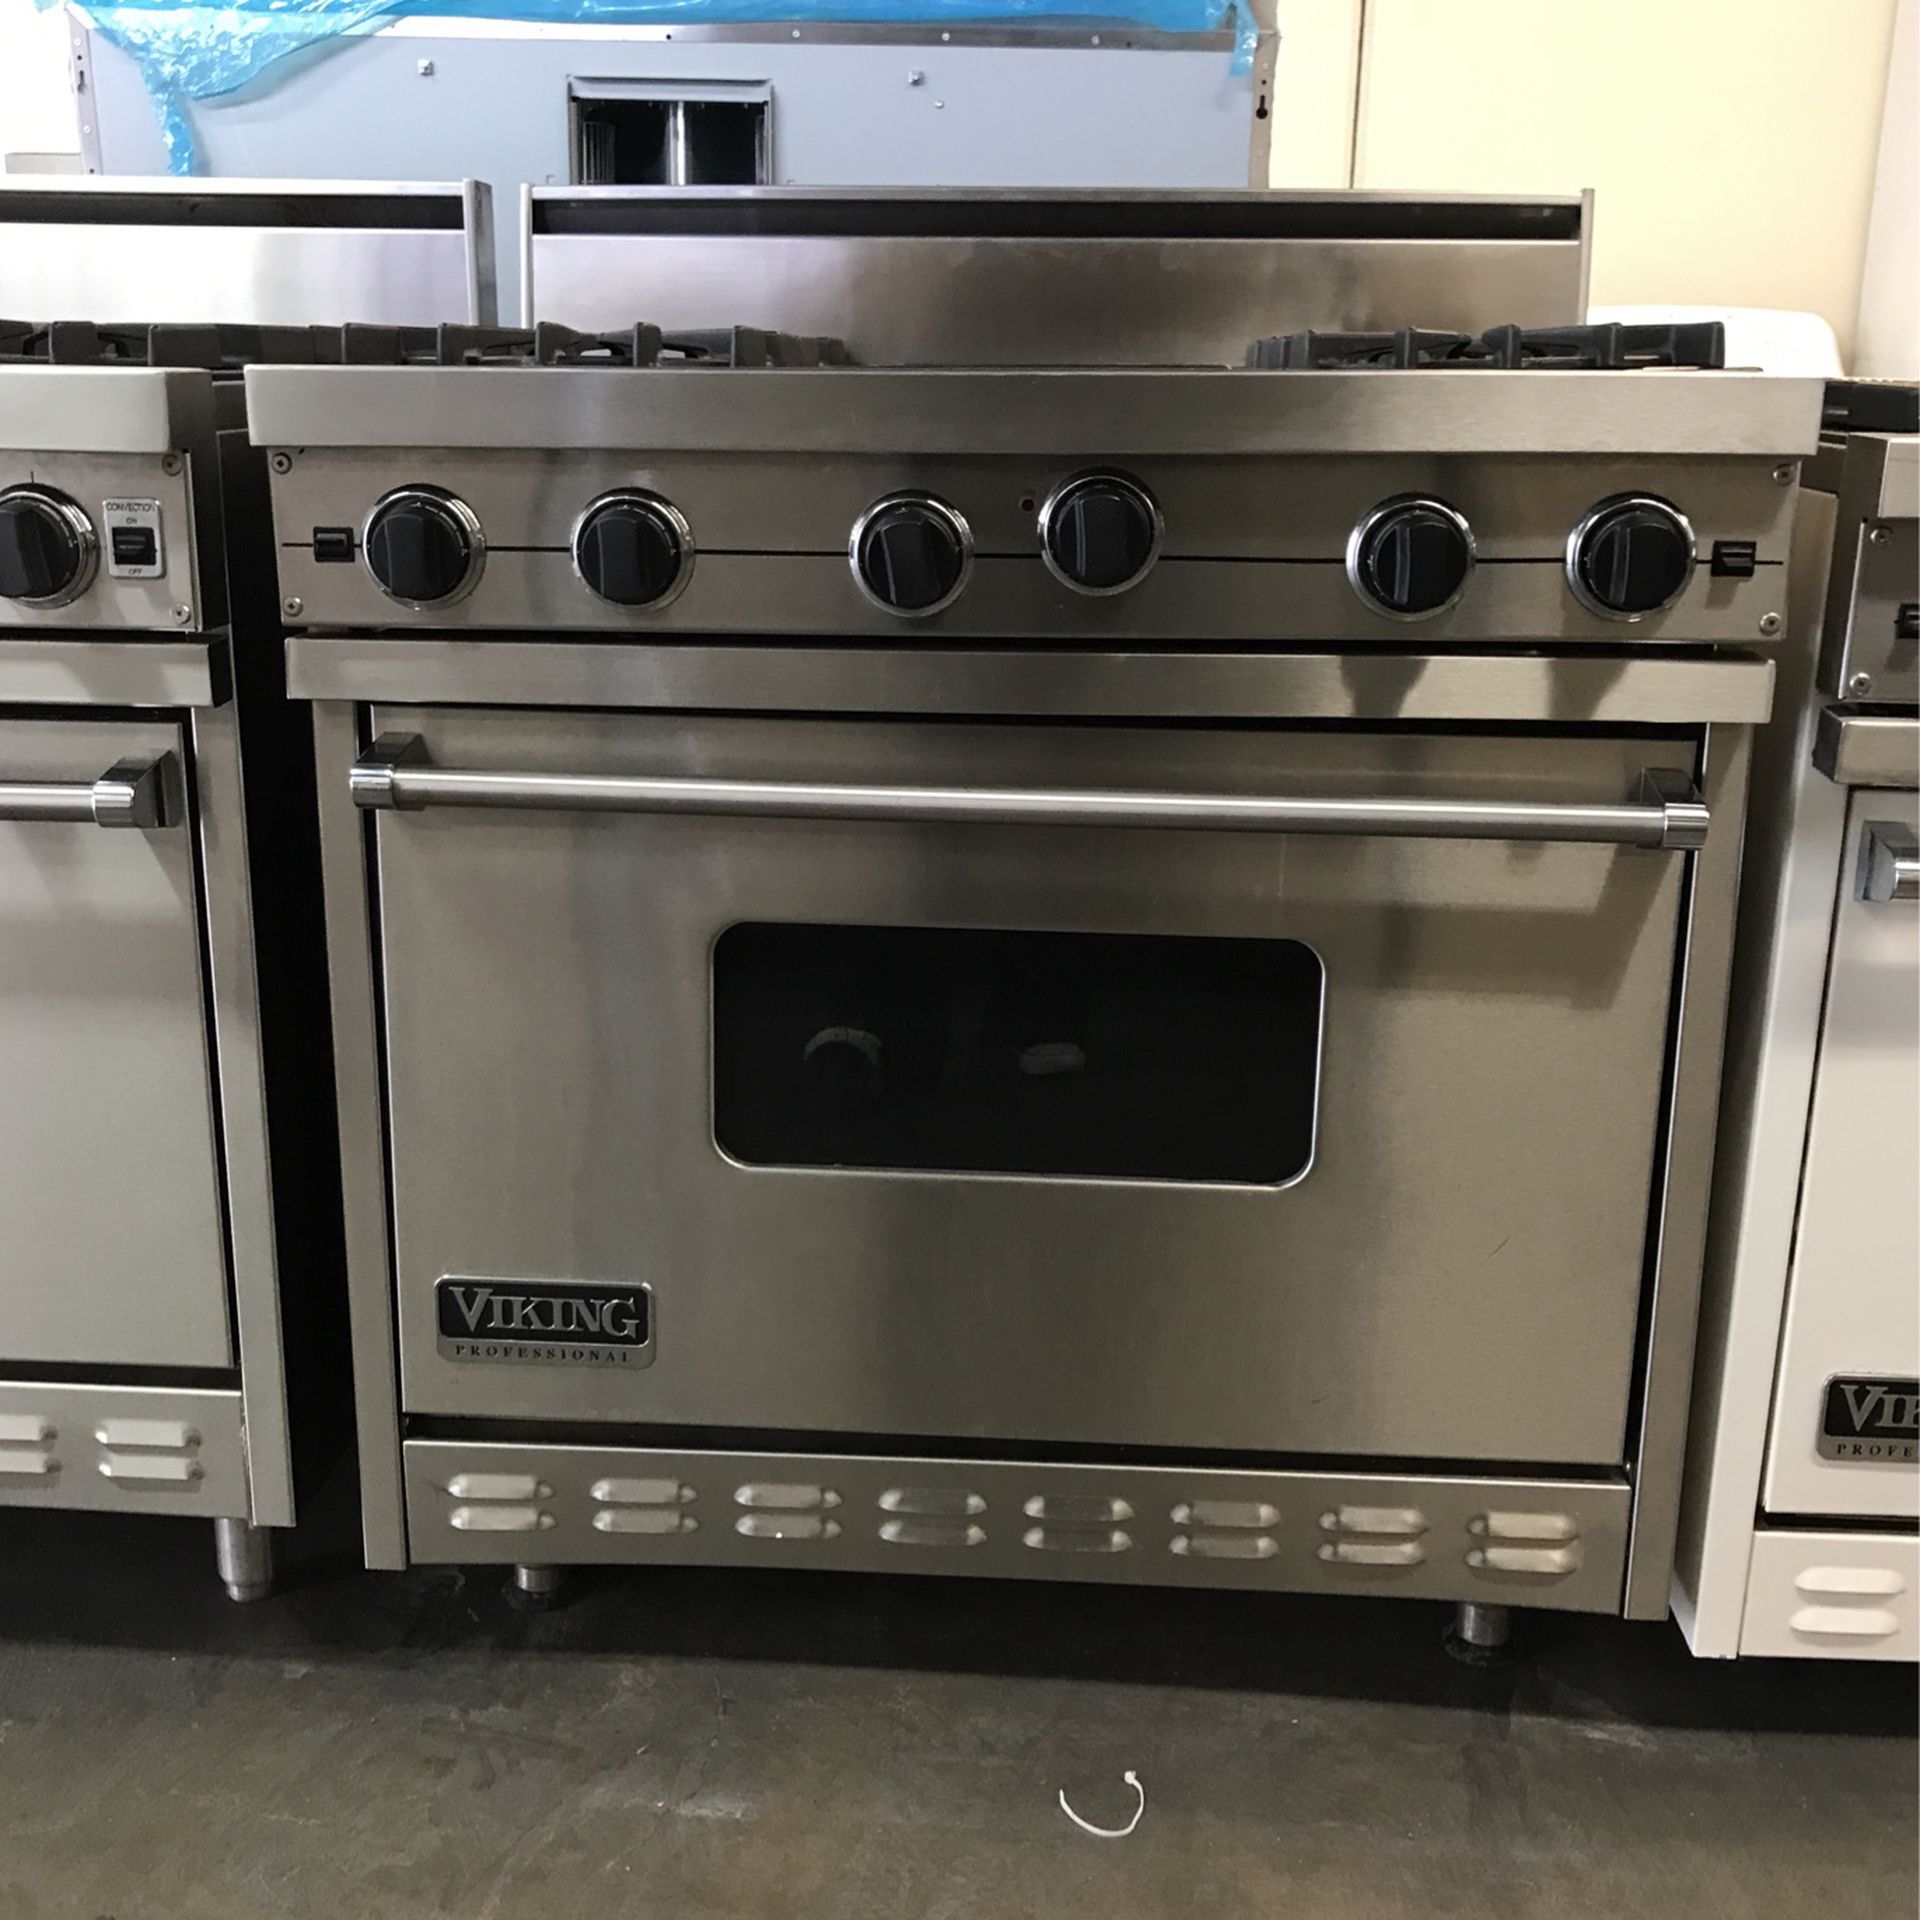 Viking 36” Wide Gas Range Stove Stainless Steel With Charbroil Grill